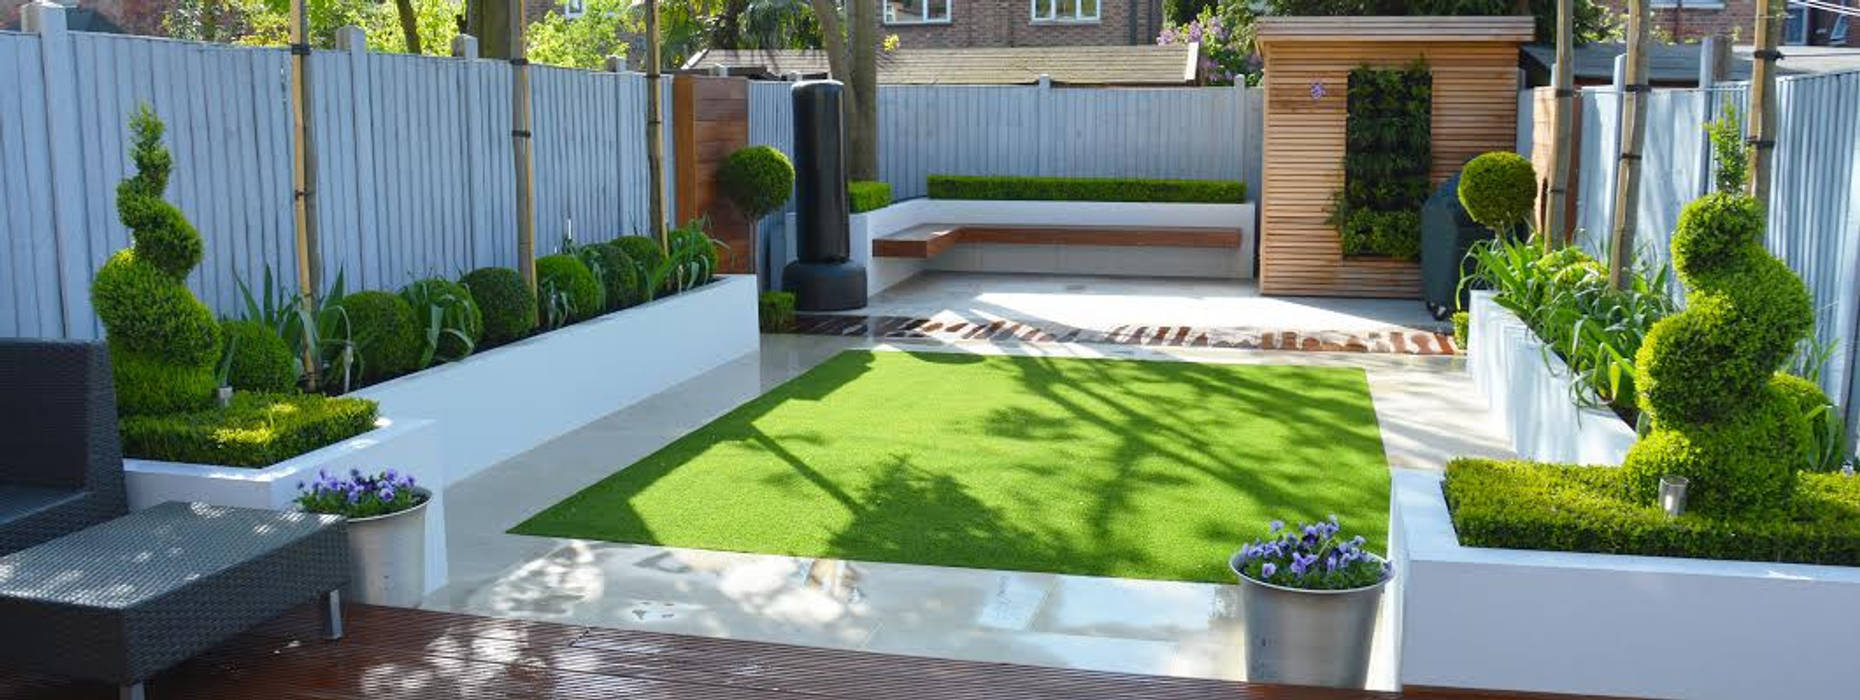 Minimalist Garden: Amazing relaxing space that you will fall in love with, Landscaper in London Landscaper in London Giardino moderno